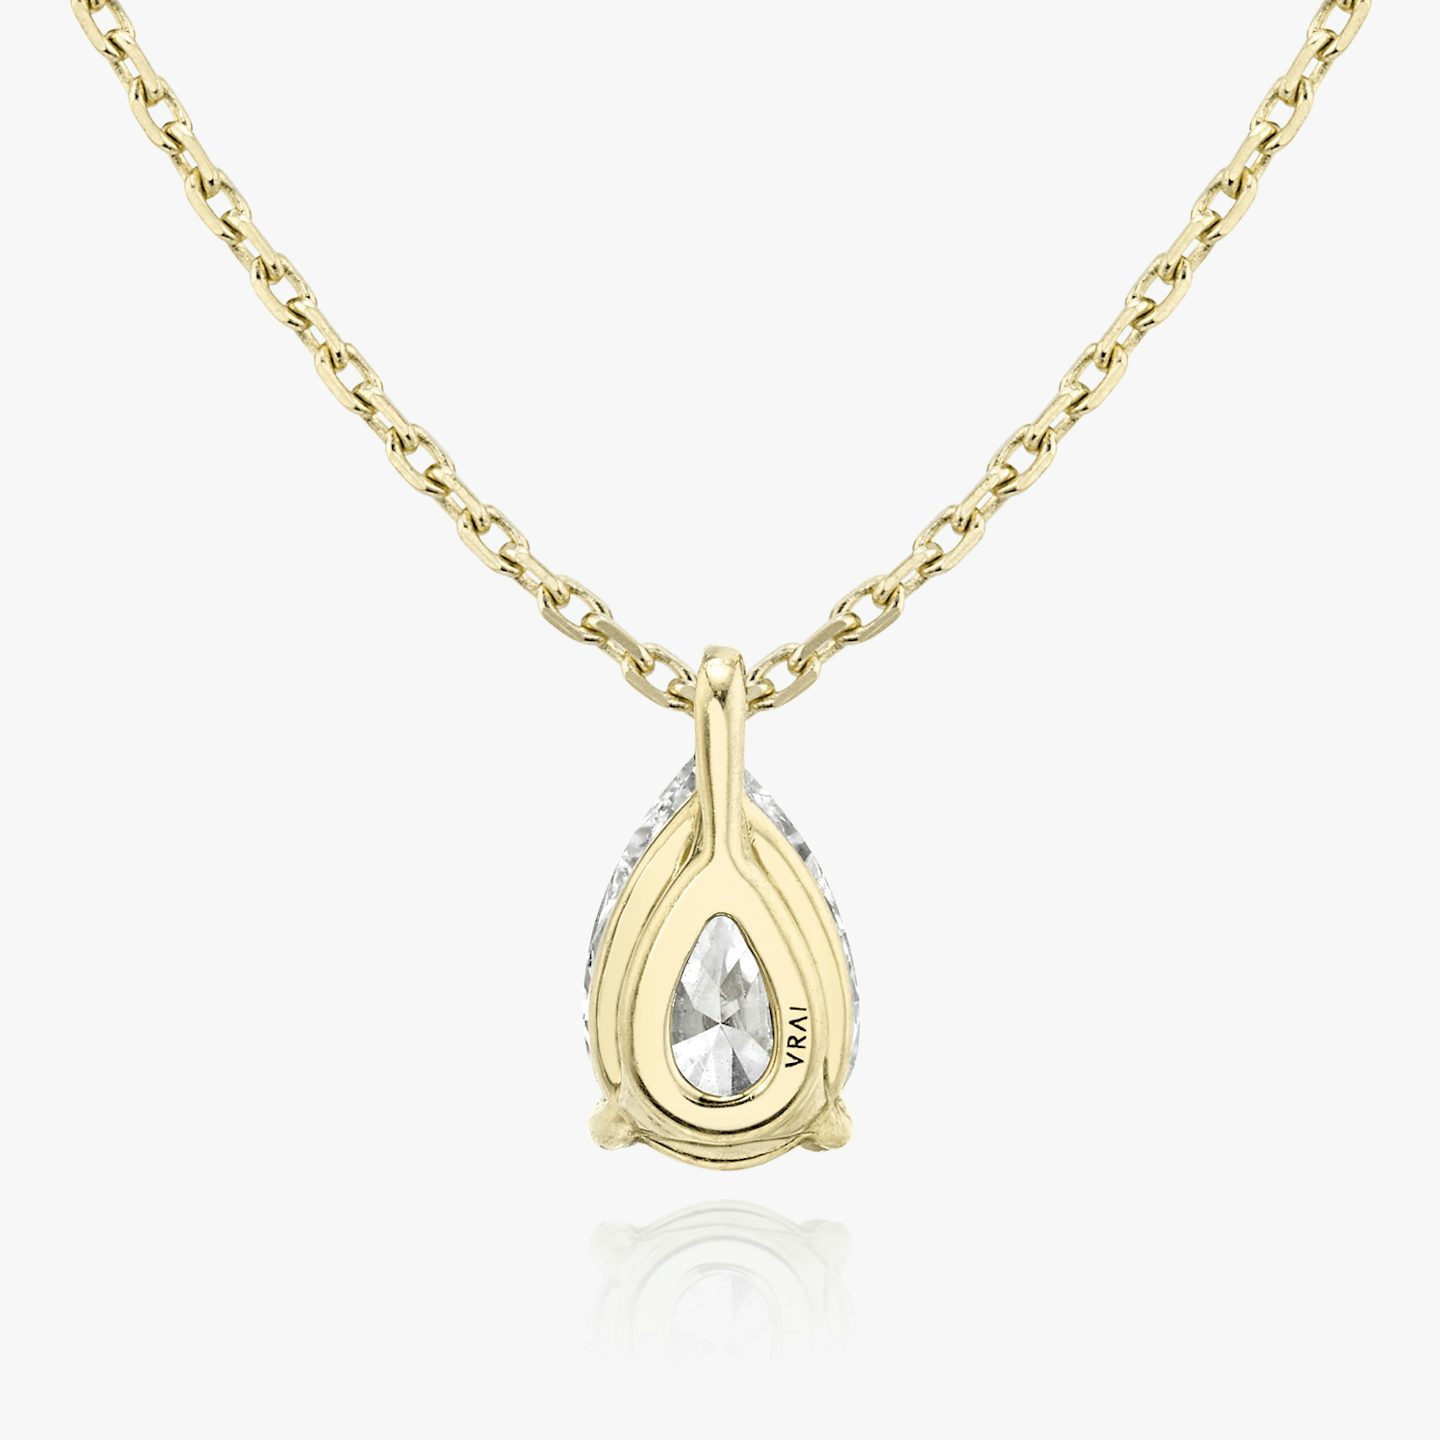 VRAI Solitaire Pendant | Pear | 14k | 18k Yellow Gold | Carat weight: 1